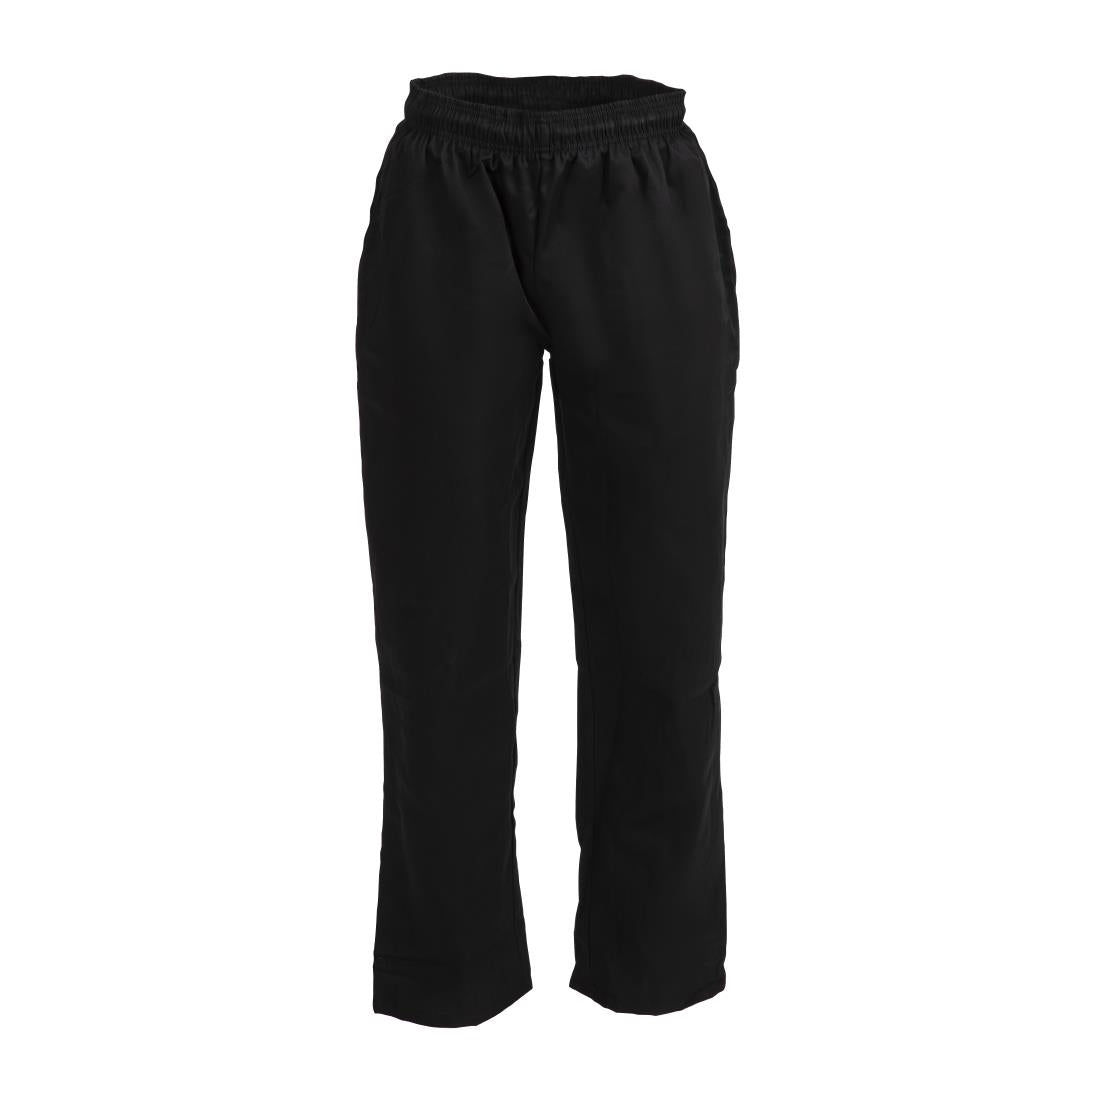 A582-5XL Whites Vegas Chef Trousers Polycotton Black 5XL JD Catering Equipment Solutions Ltd